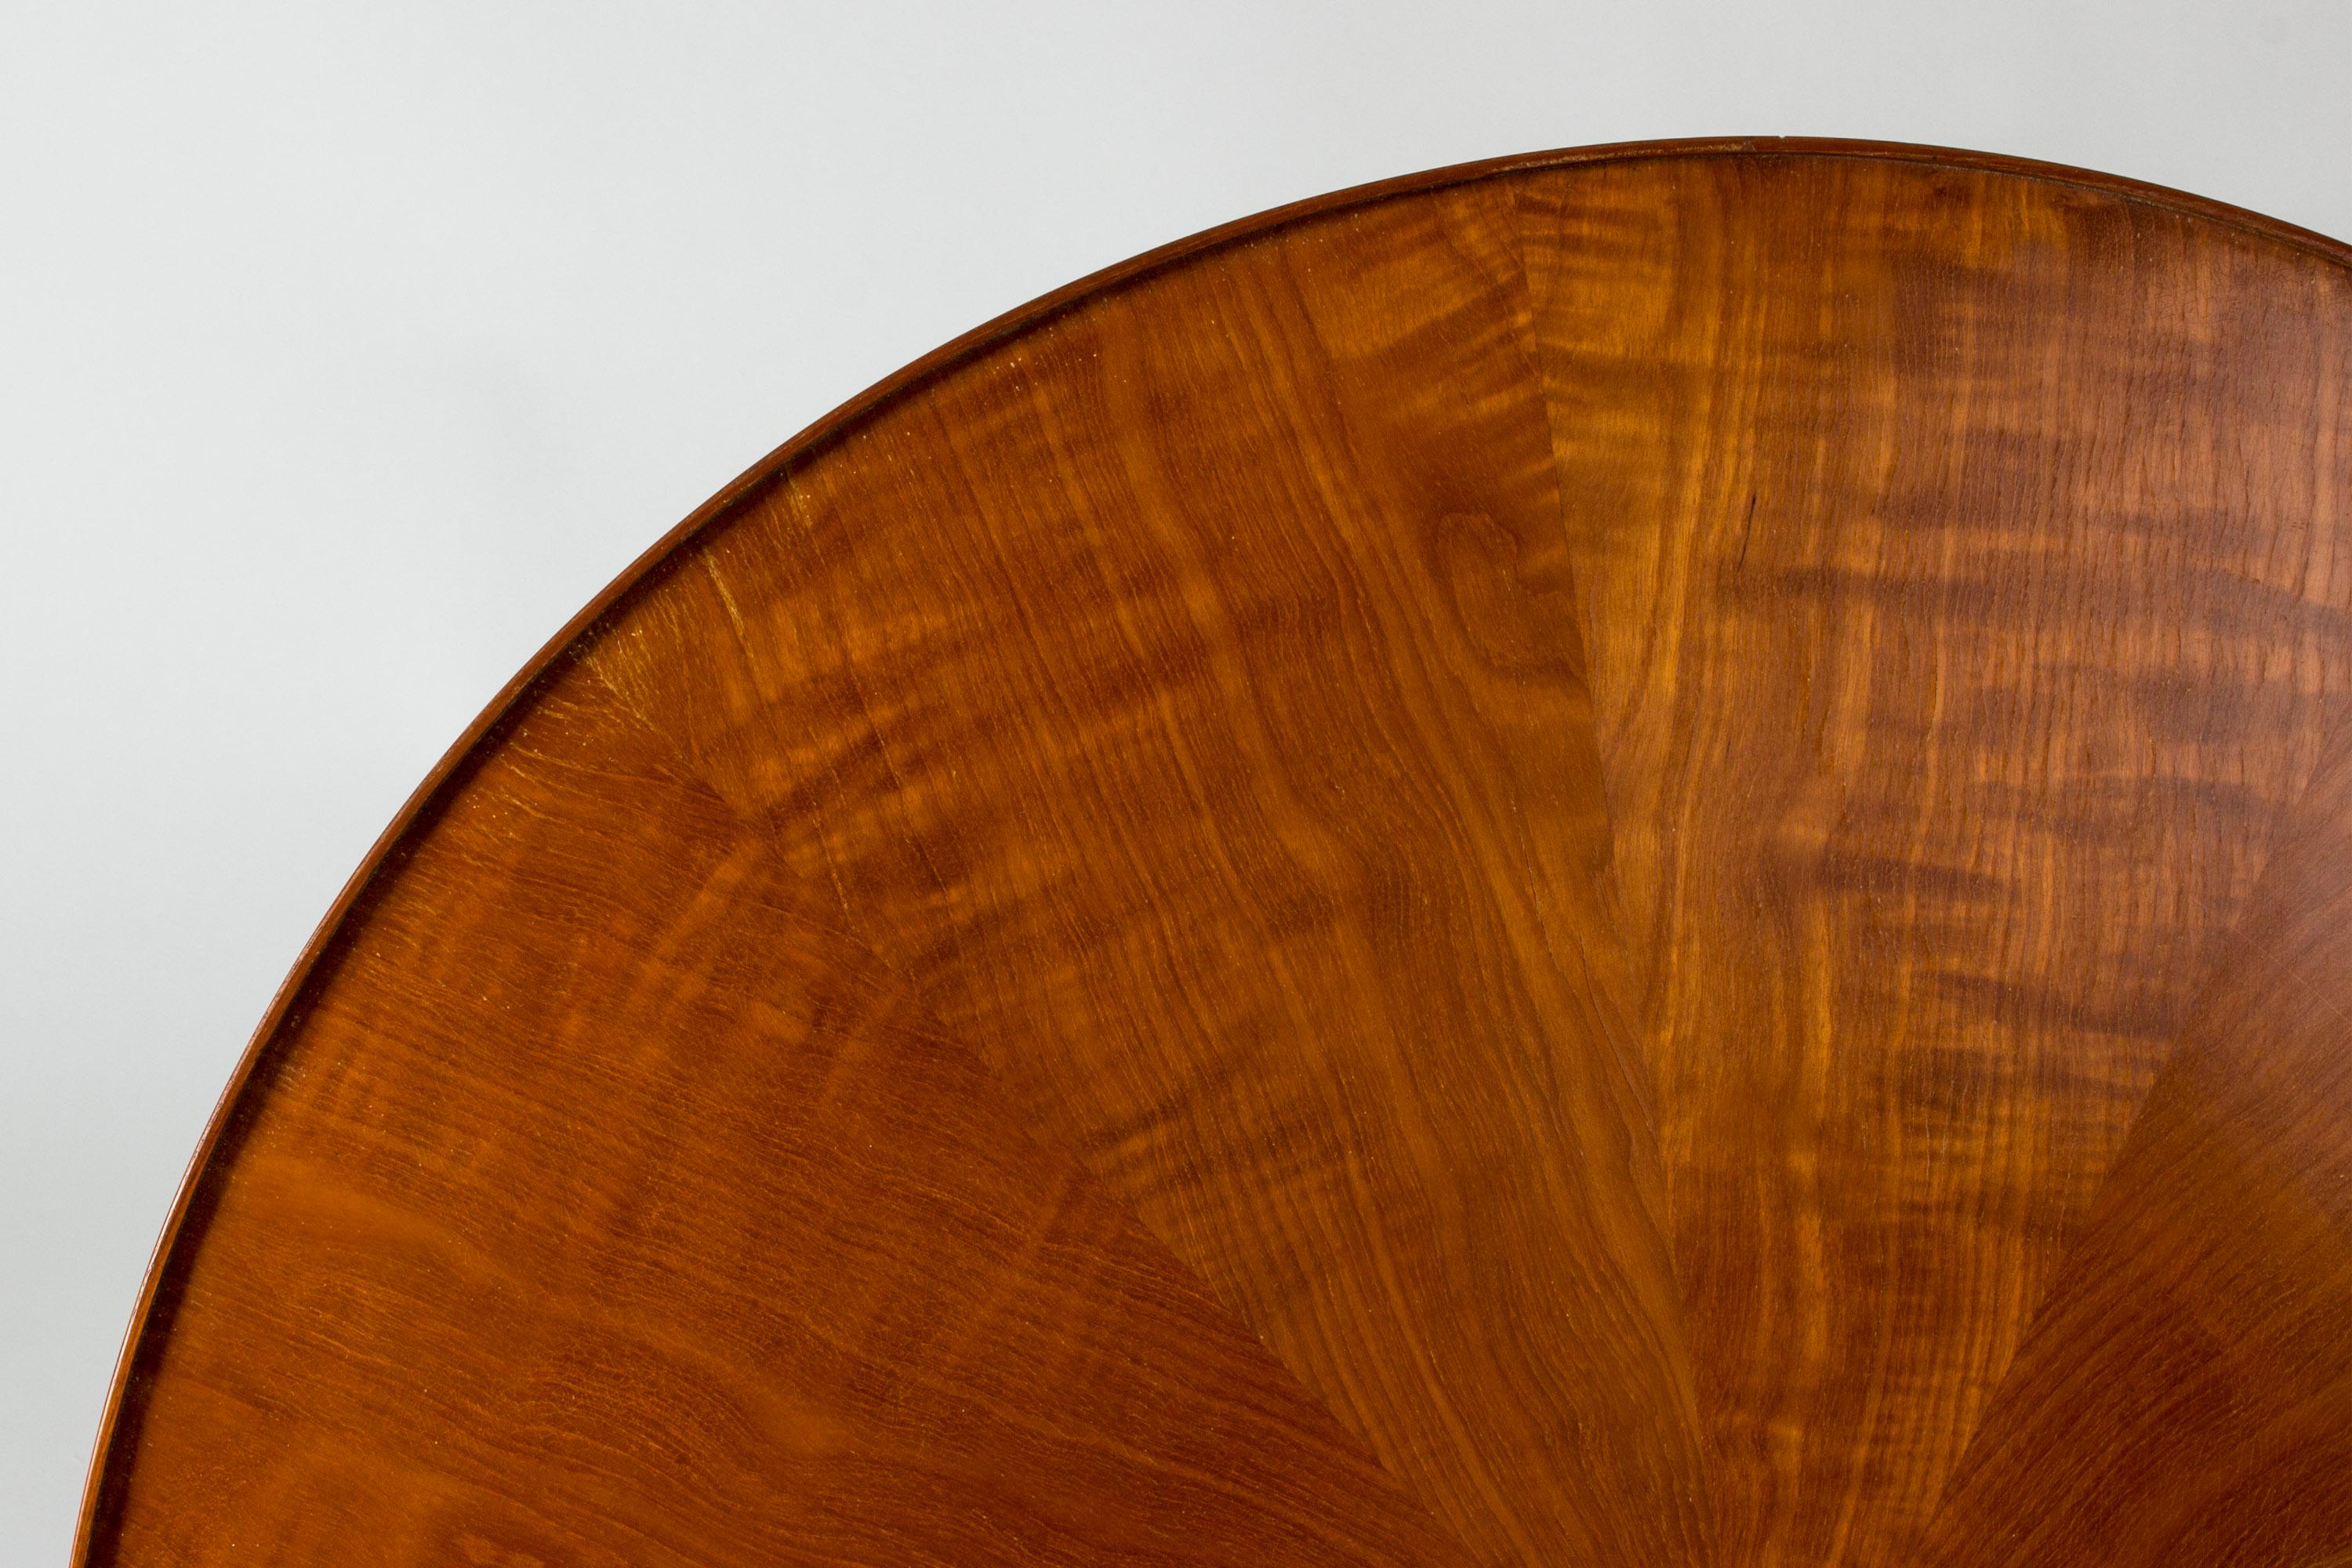 Mid-20th Century Walnut Occasional Table by Oscar Nilsson for Hantverket, Sweden, 1942 For Sale